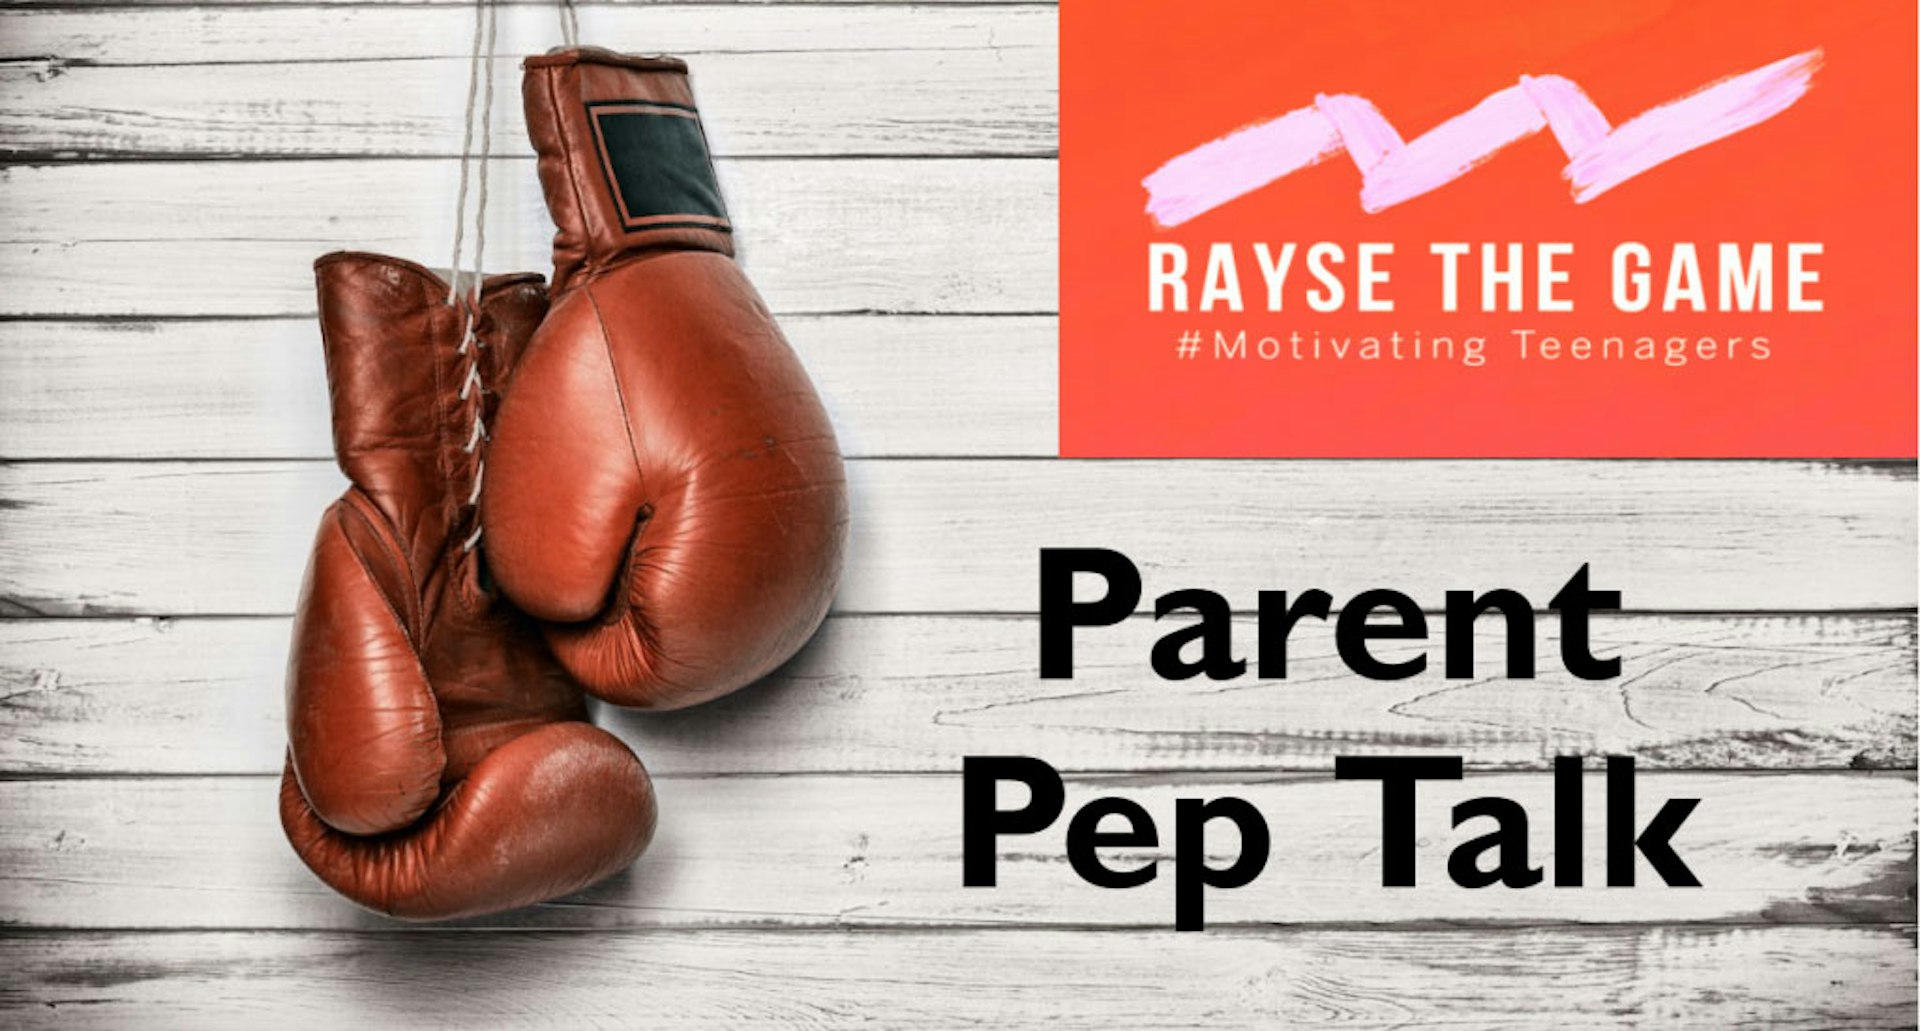 Parent Pep Talk – how to ‘rayse’ resilient teens